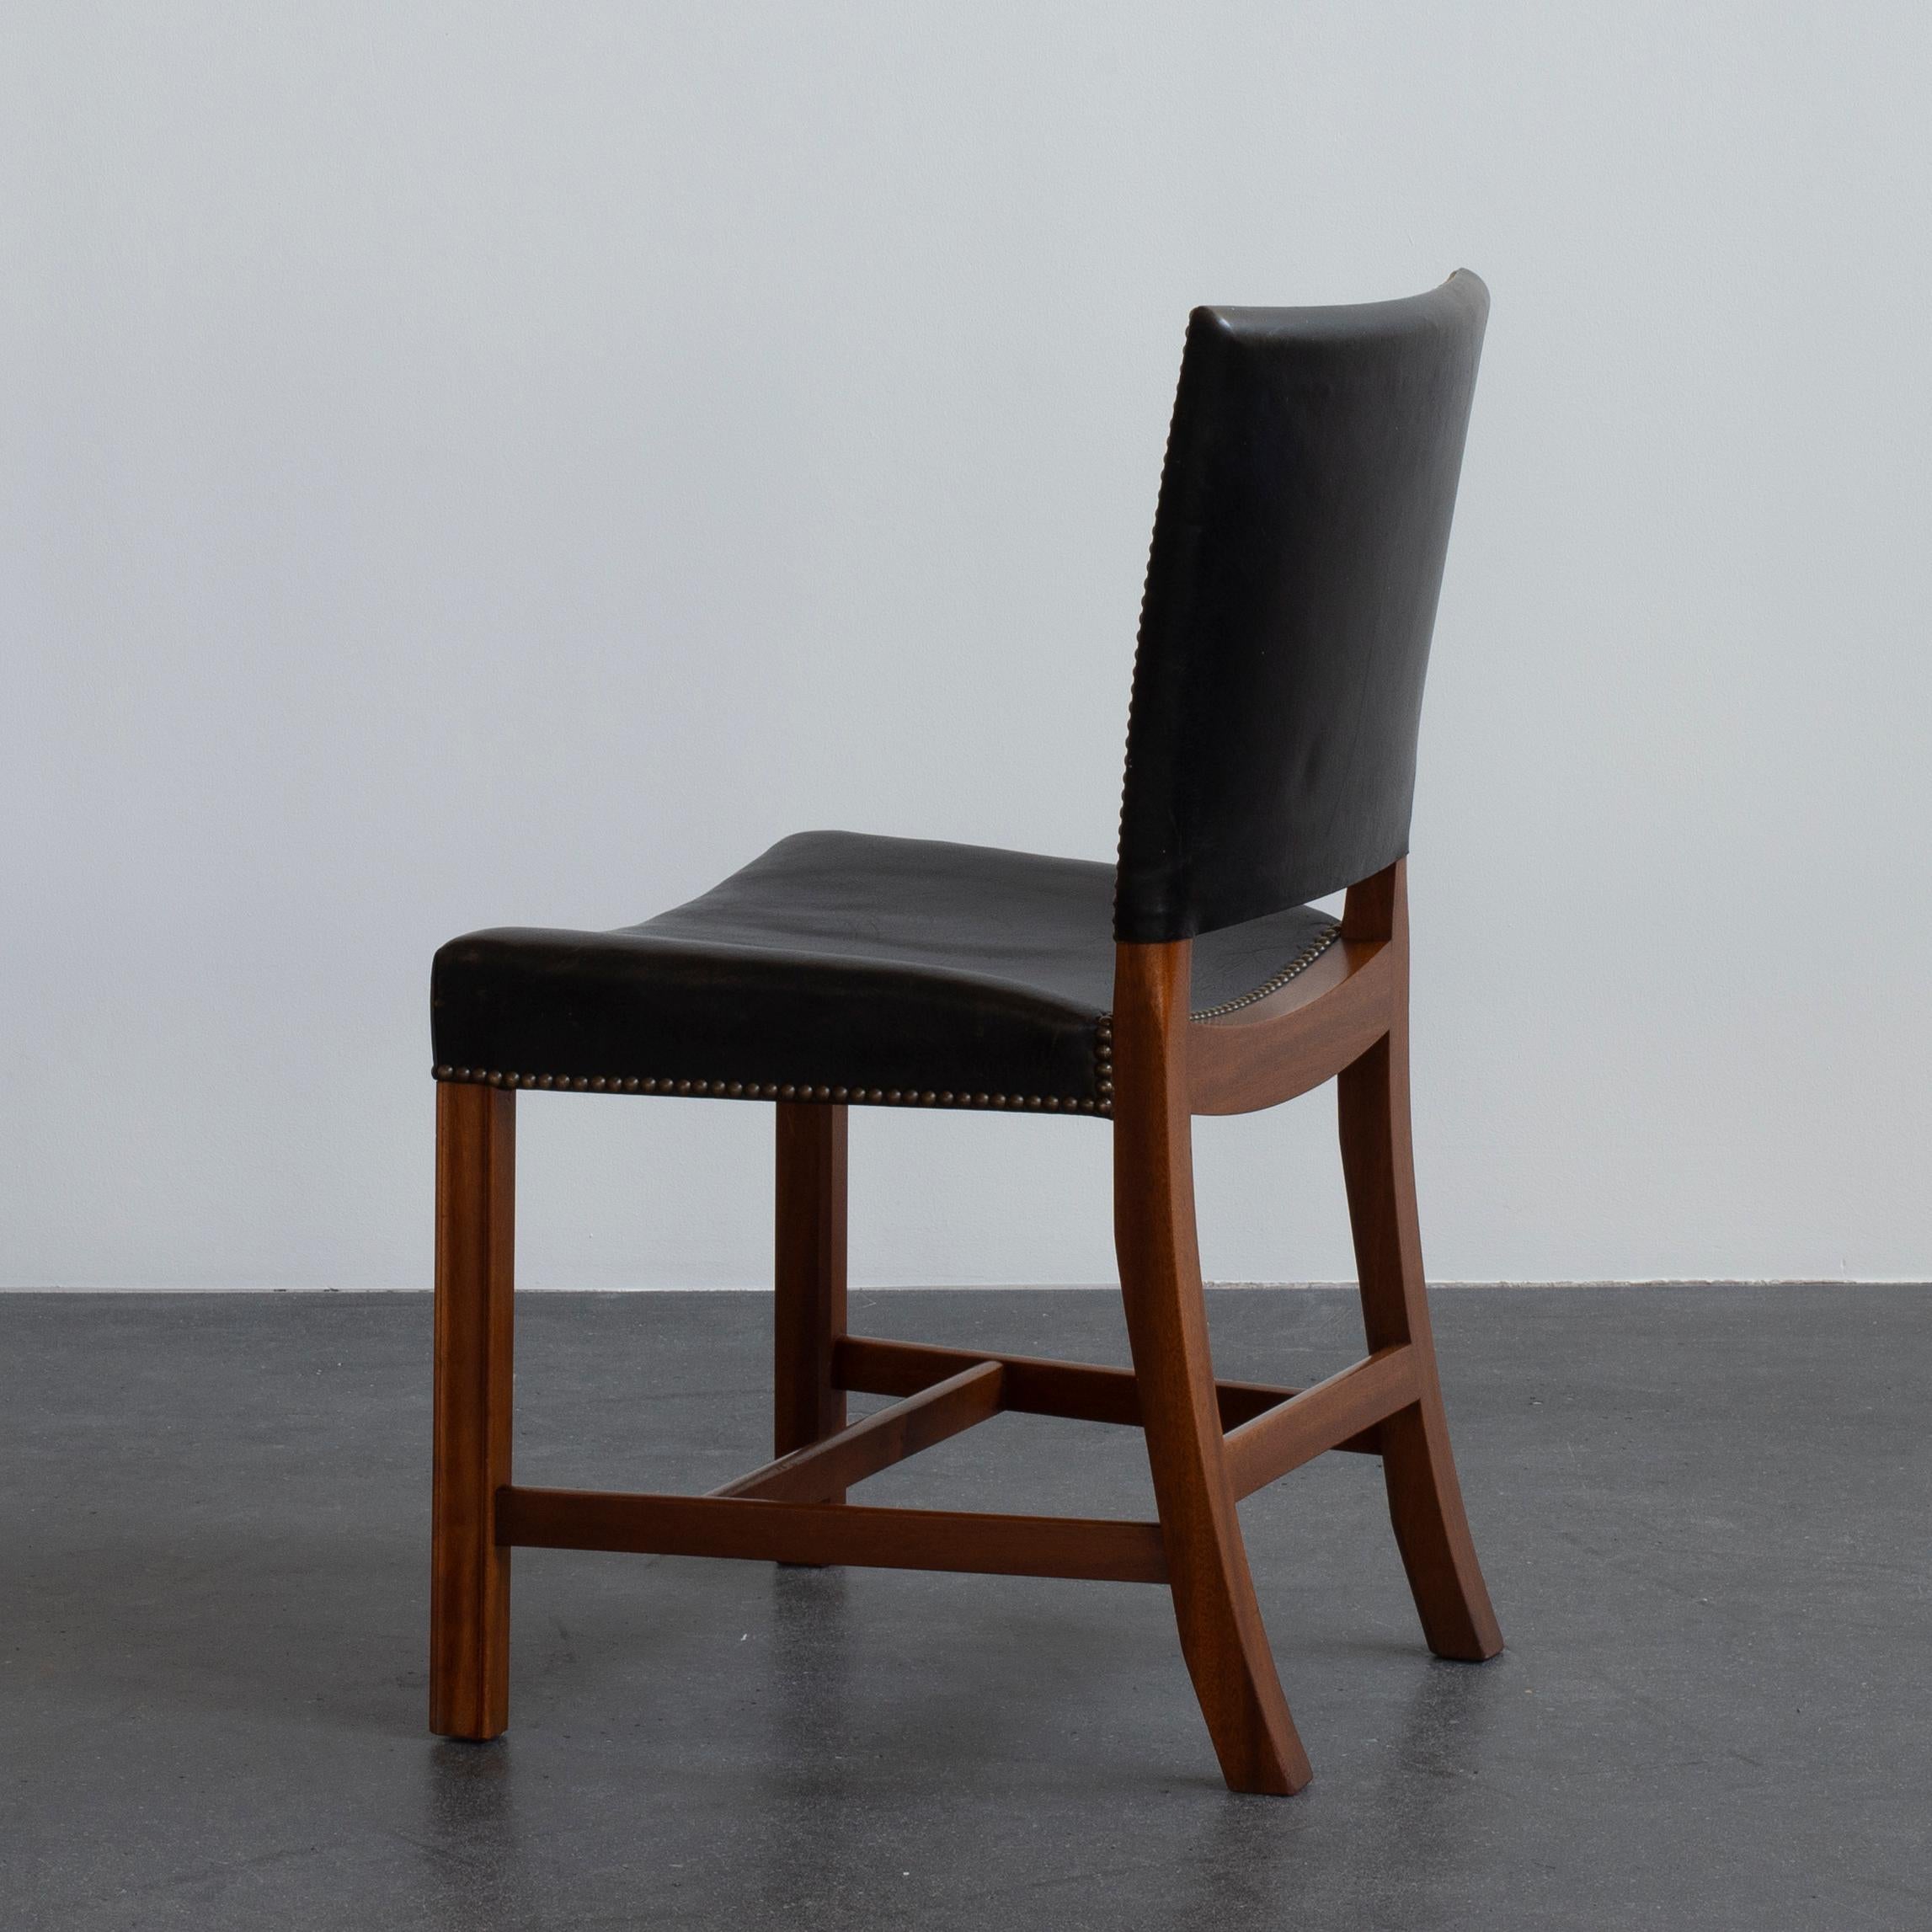 founding father skin chair